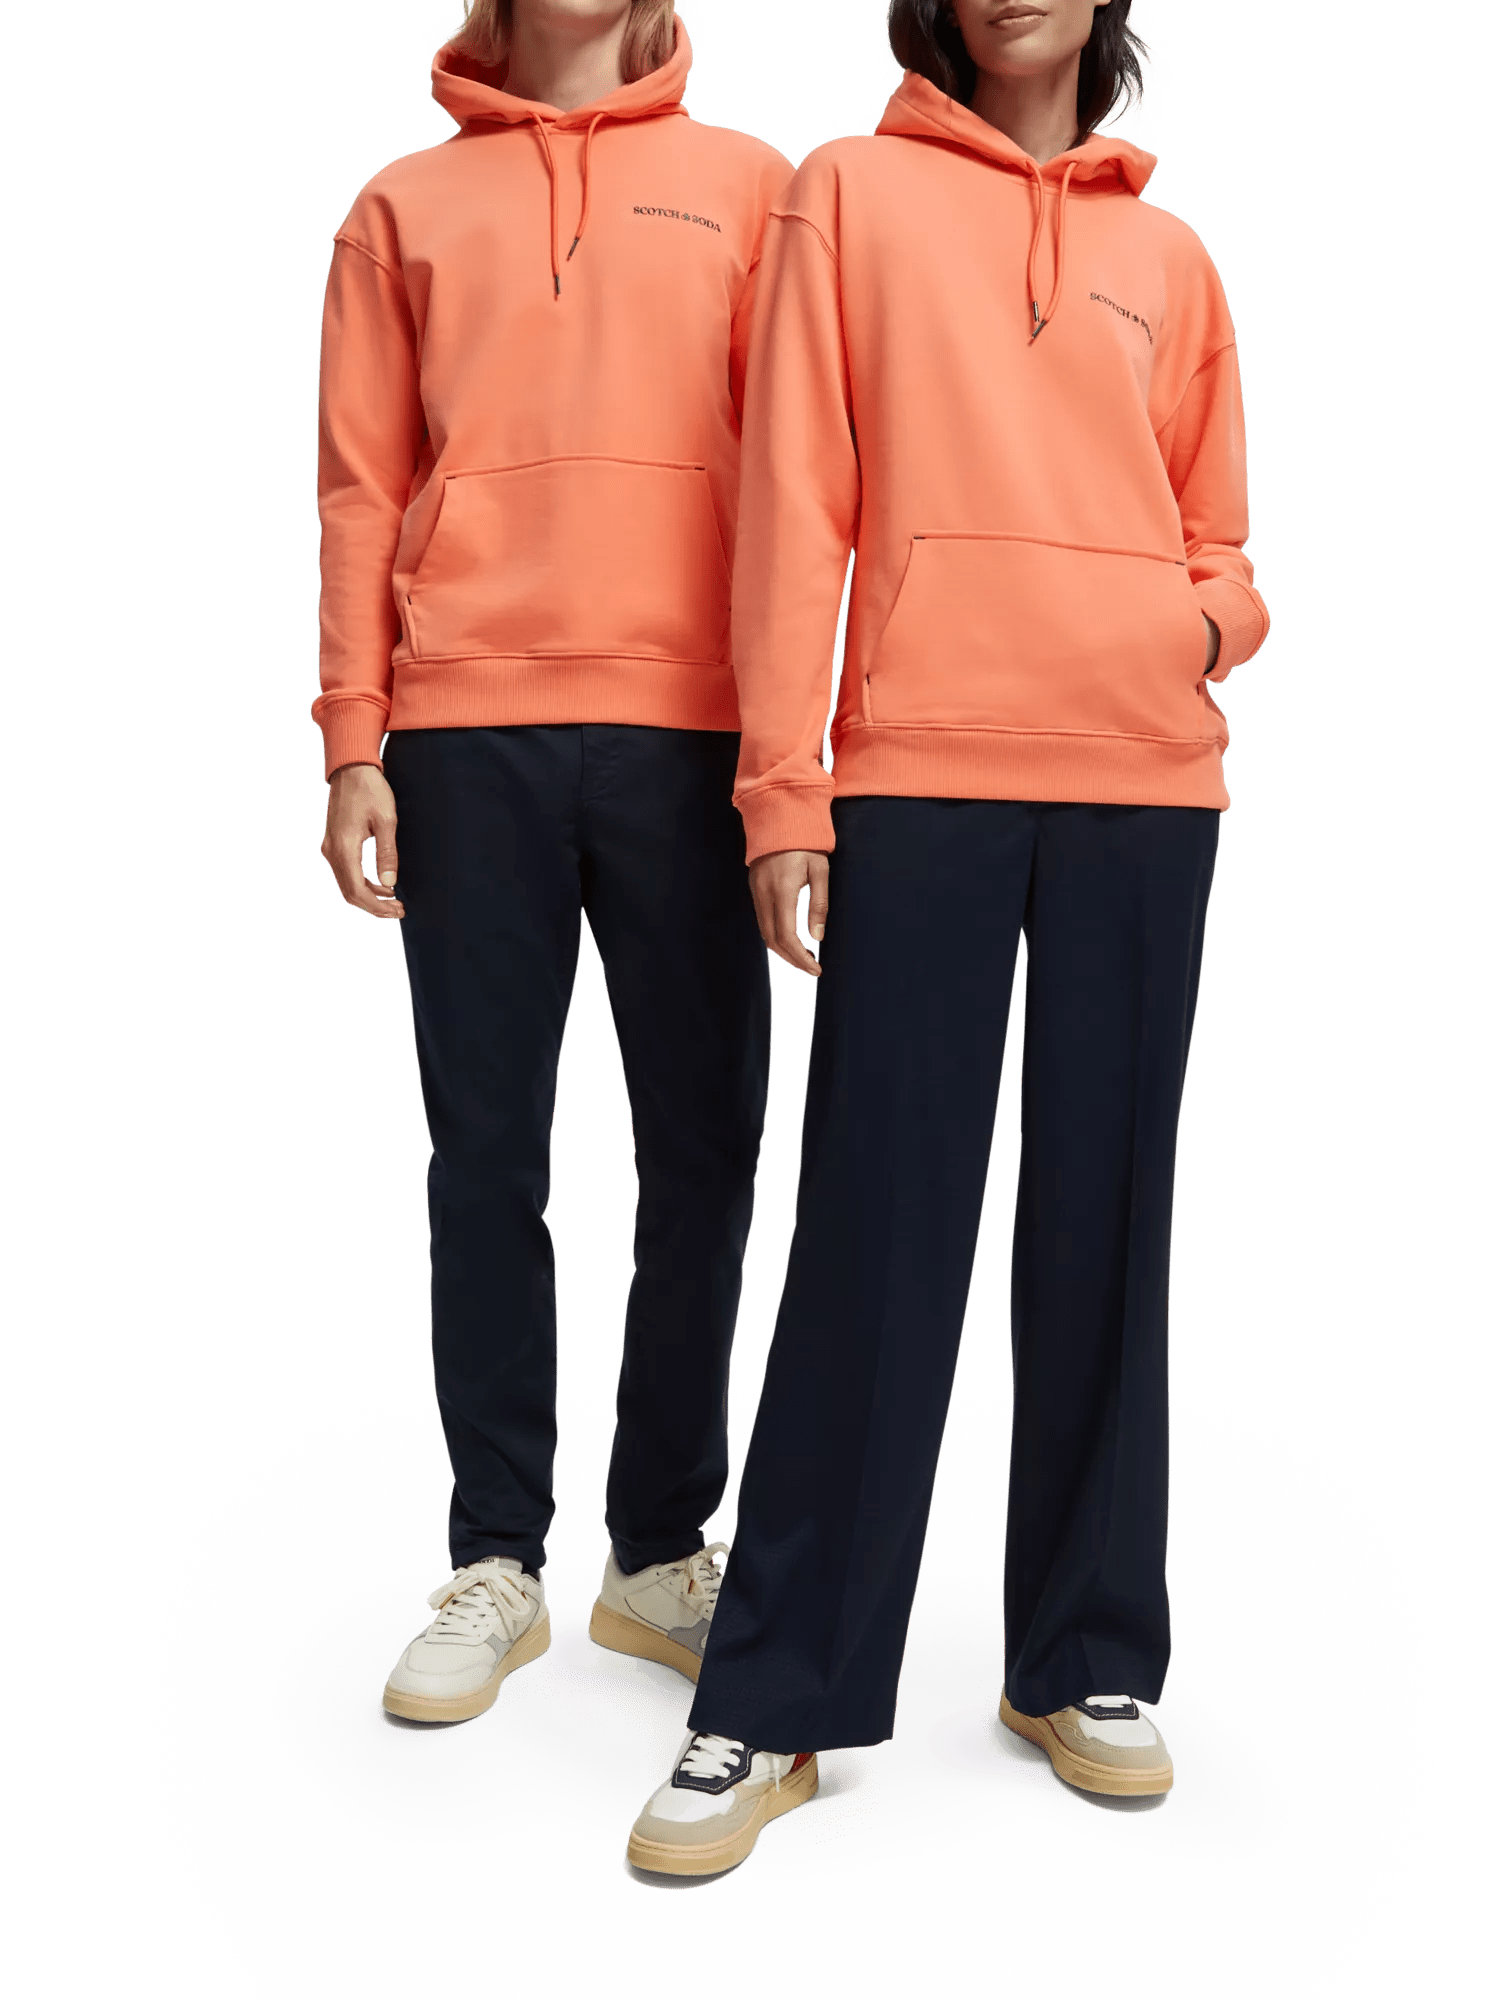 NS2173-2 Cotton Fleece Pullover Hoodie in White – National Standards